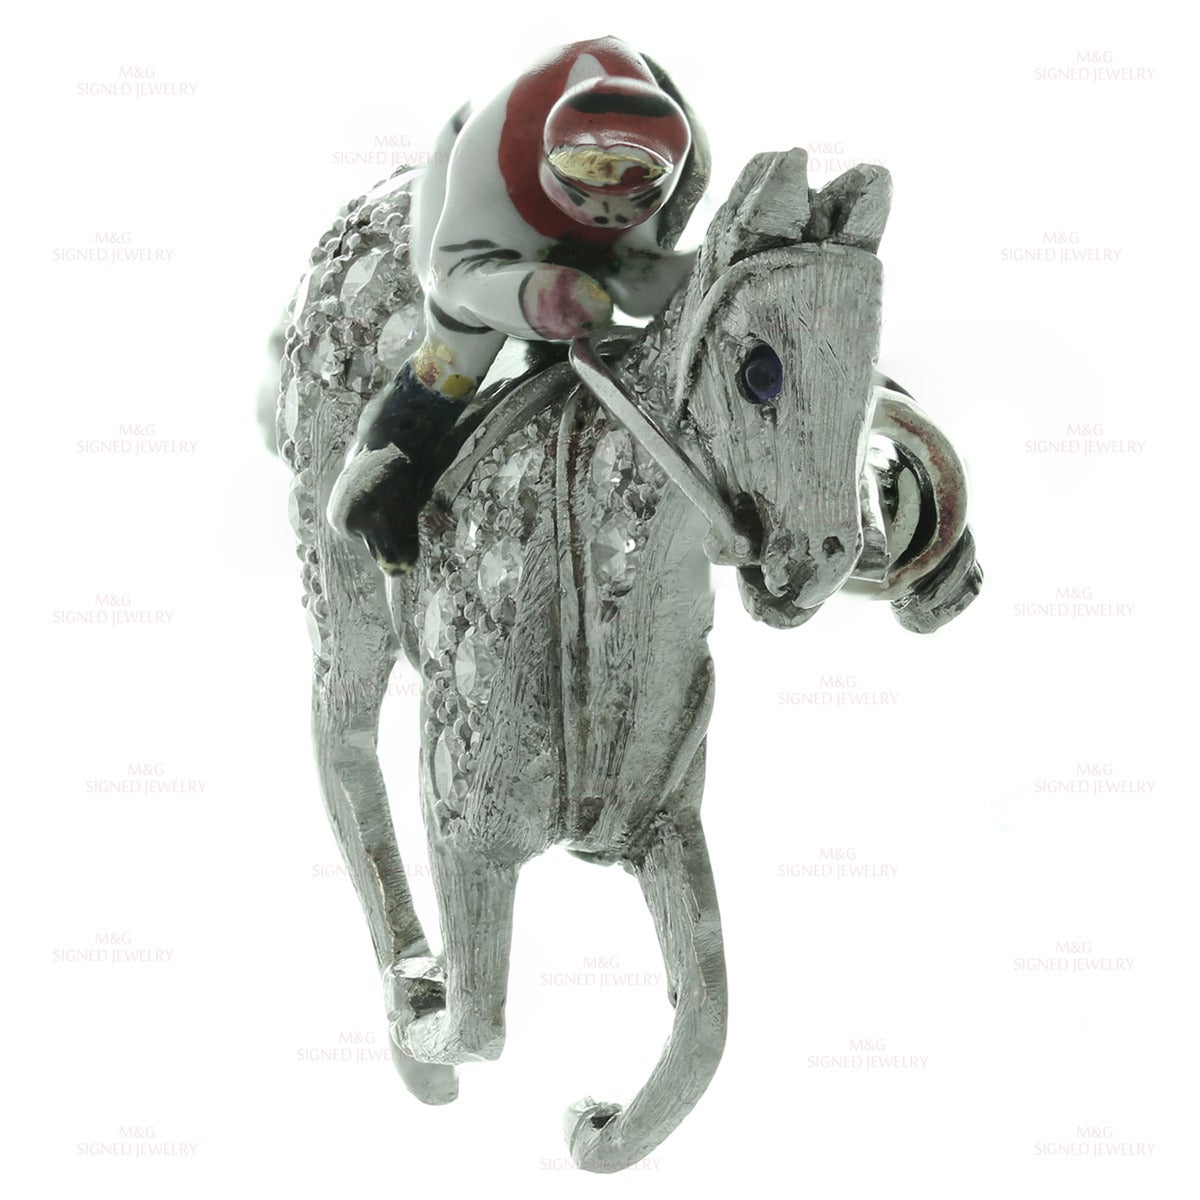 This rare art deco Cartier brooch is made in fine platinum and features a finely crafted galloping horse pave-set with approximately 27 full-cut and 8 rose-cut diamonds of an estimated 0.95 carats and accented with blue cabochon sapphire eye. A